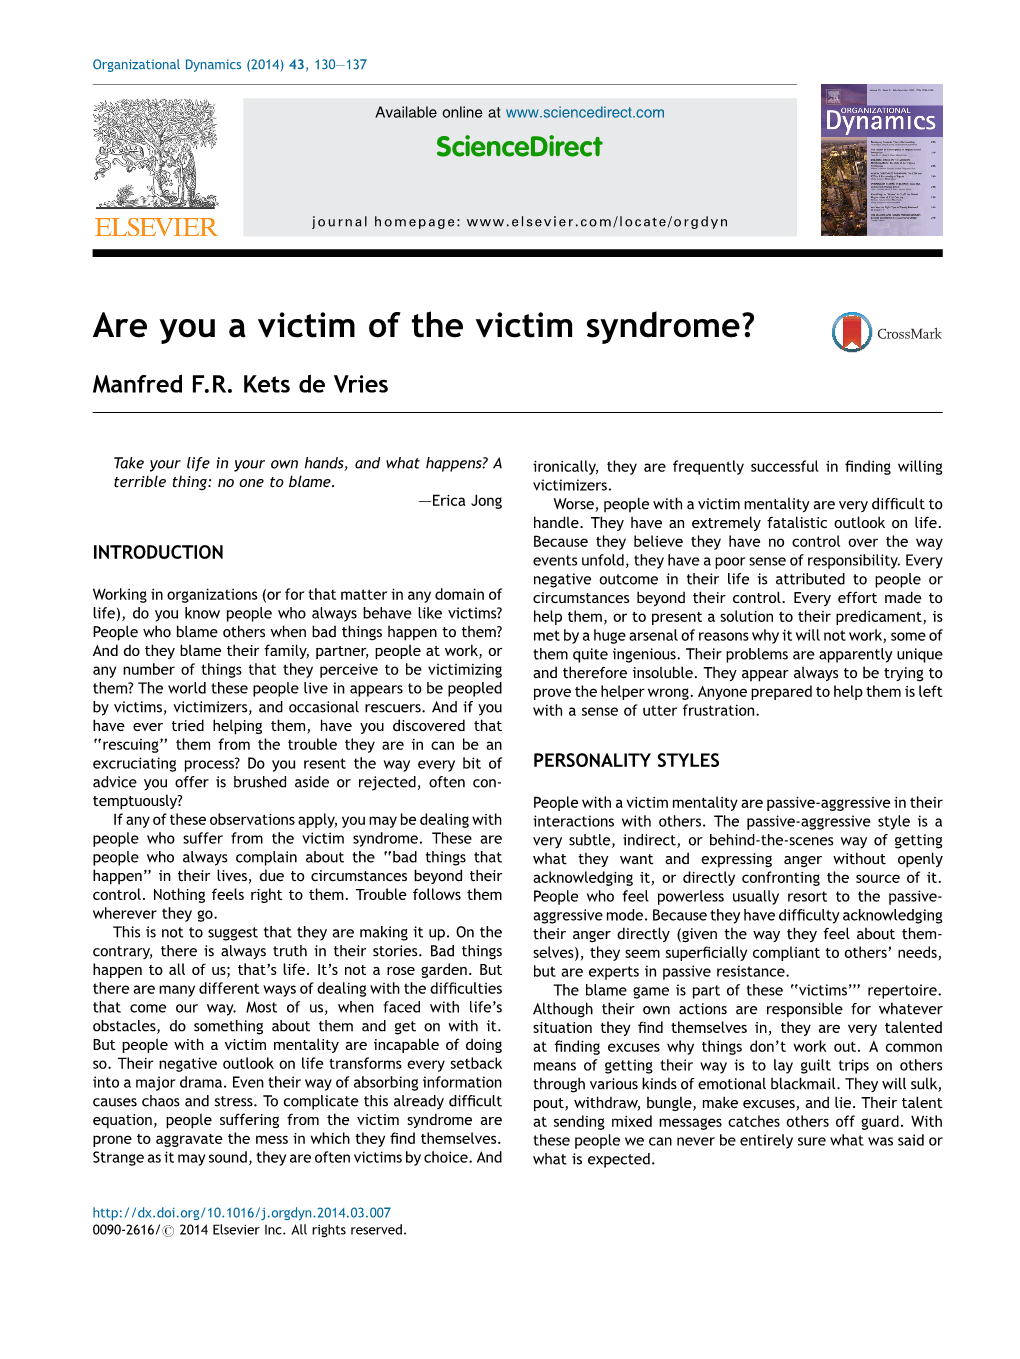 Are You a Victim of the Victim Syndrome?